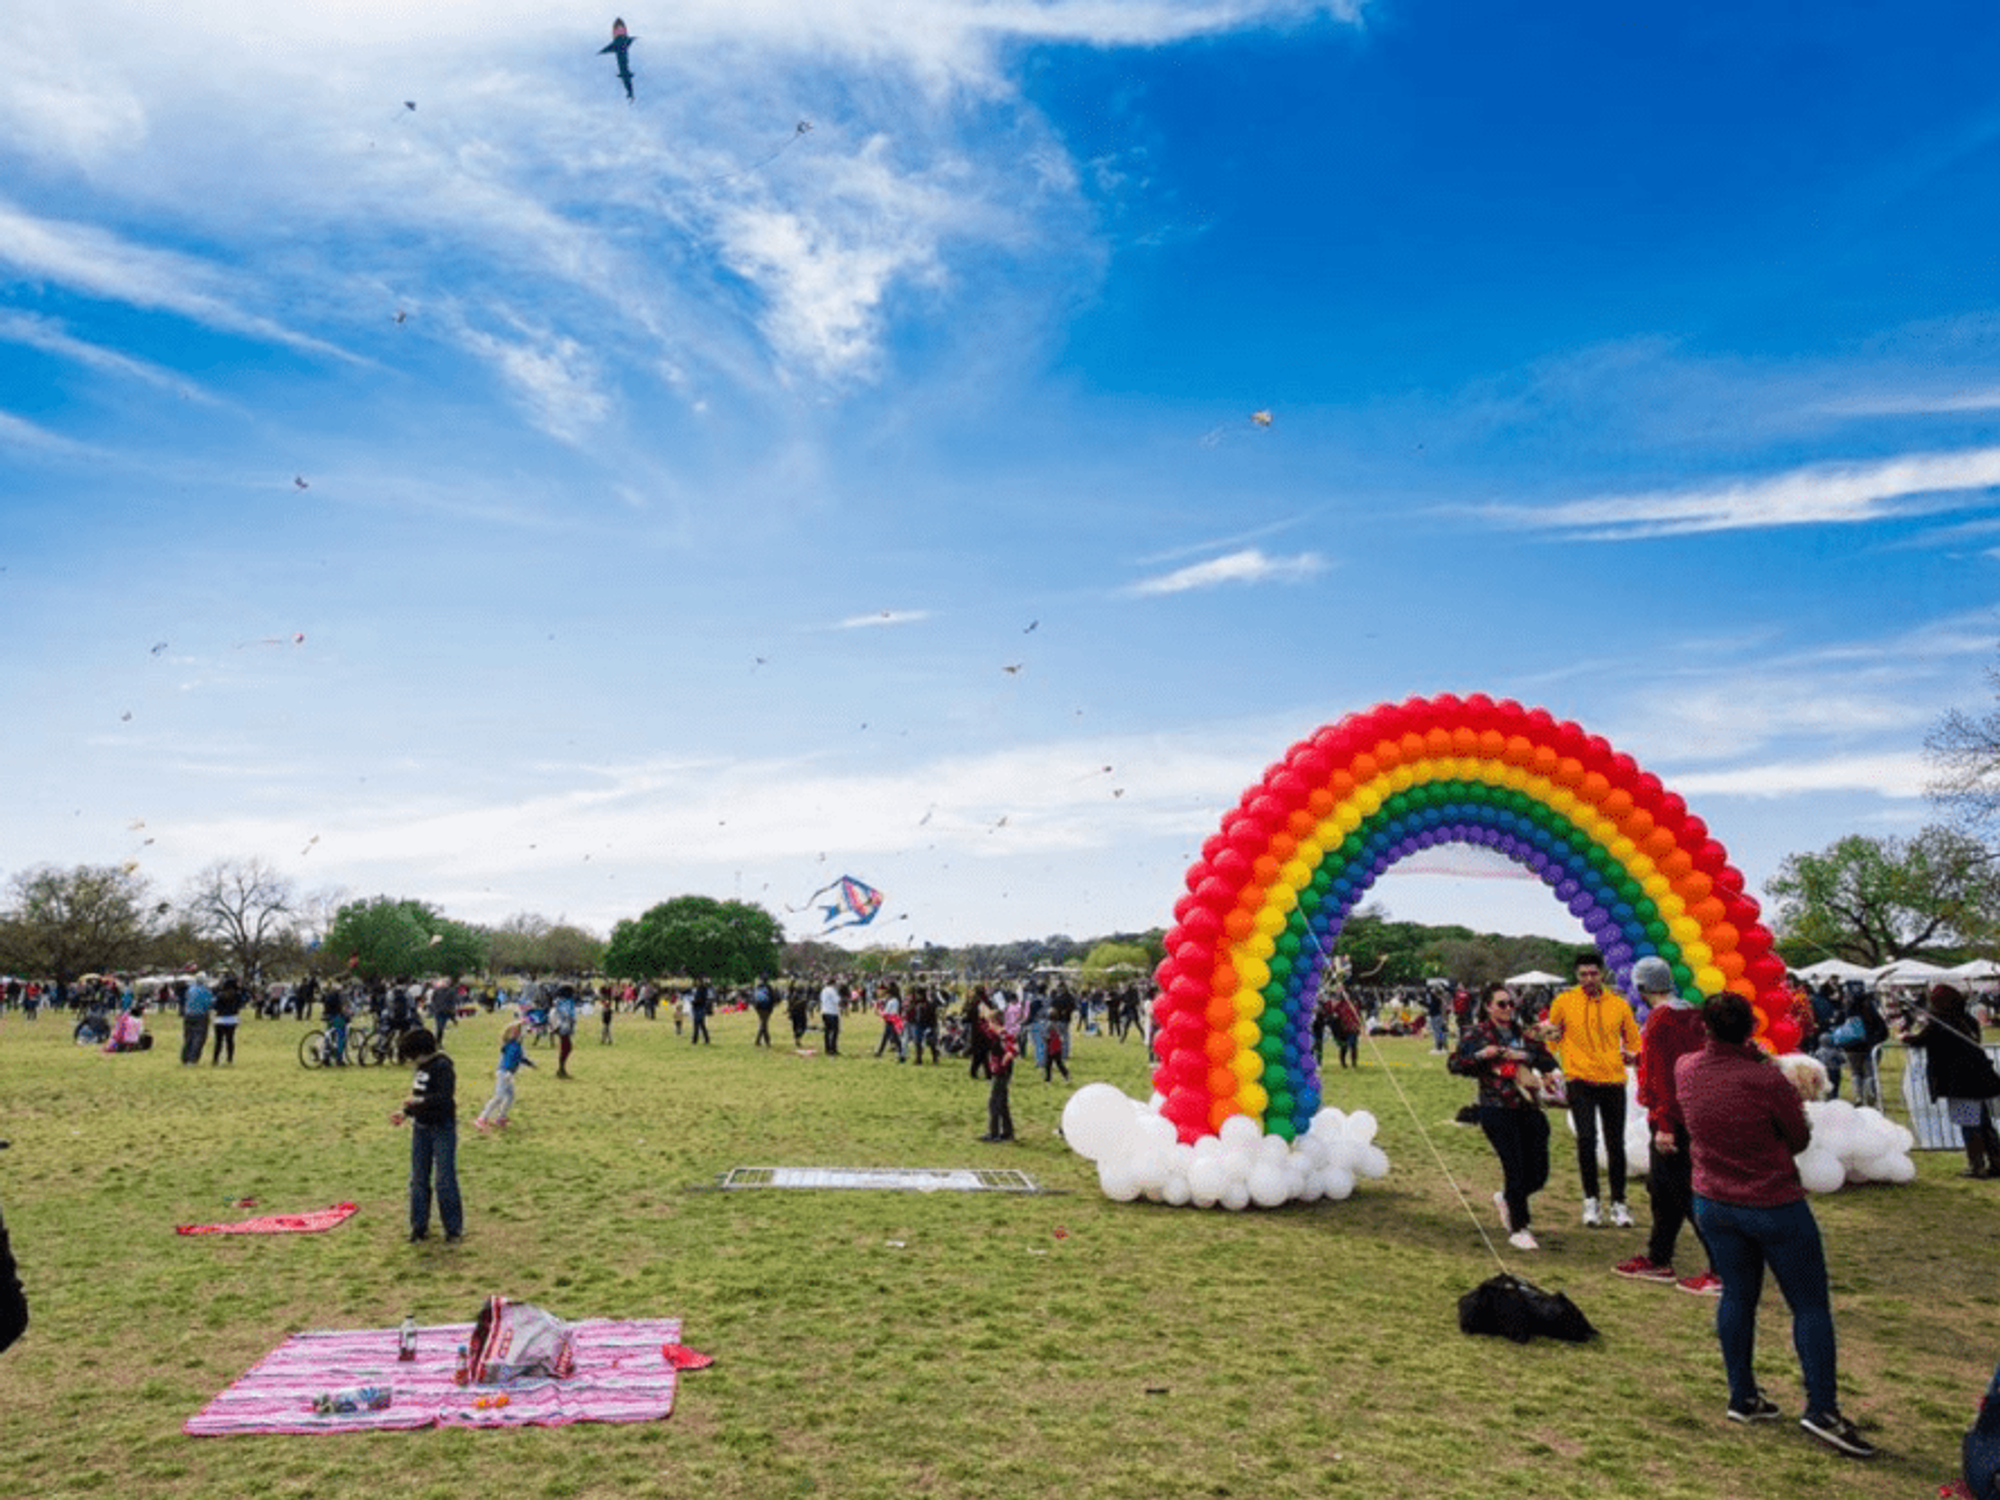 A balloon rainbow stands in Zilker Park during ABC Kite Fest.